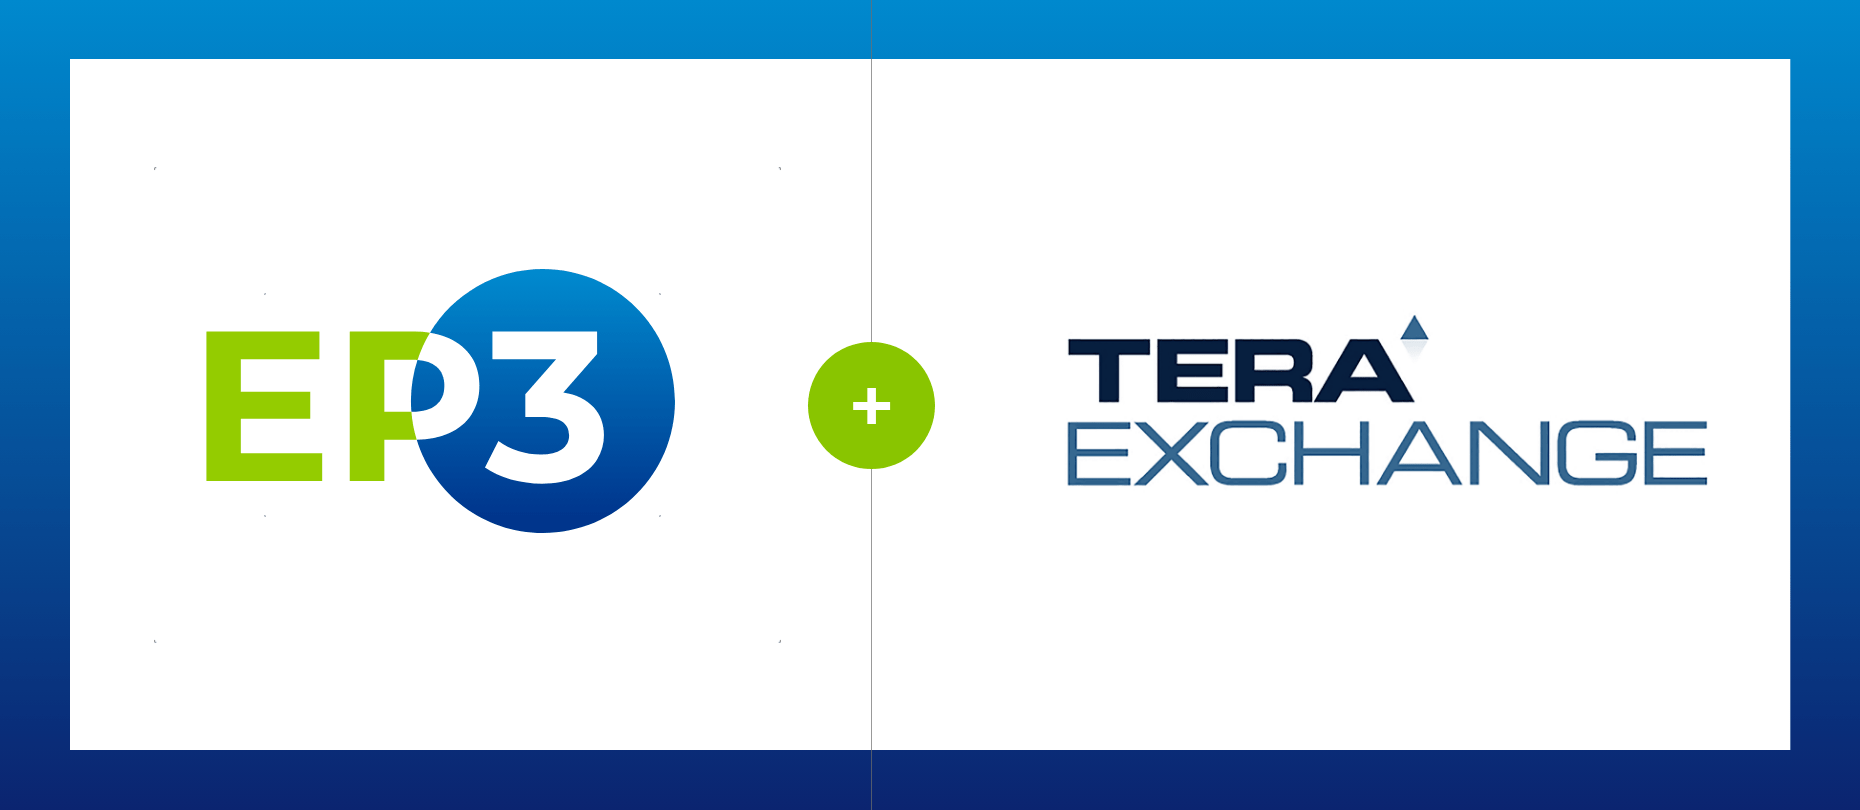 TeraExchange Selects EP3 Platform from Connamara Technologies to Power Swap Execution Facility